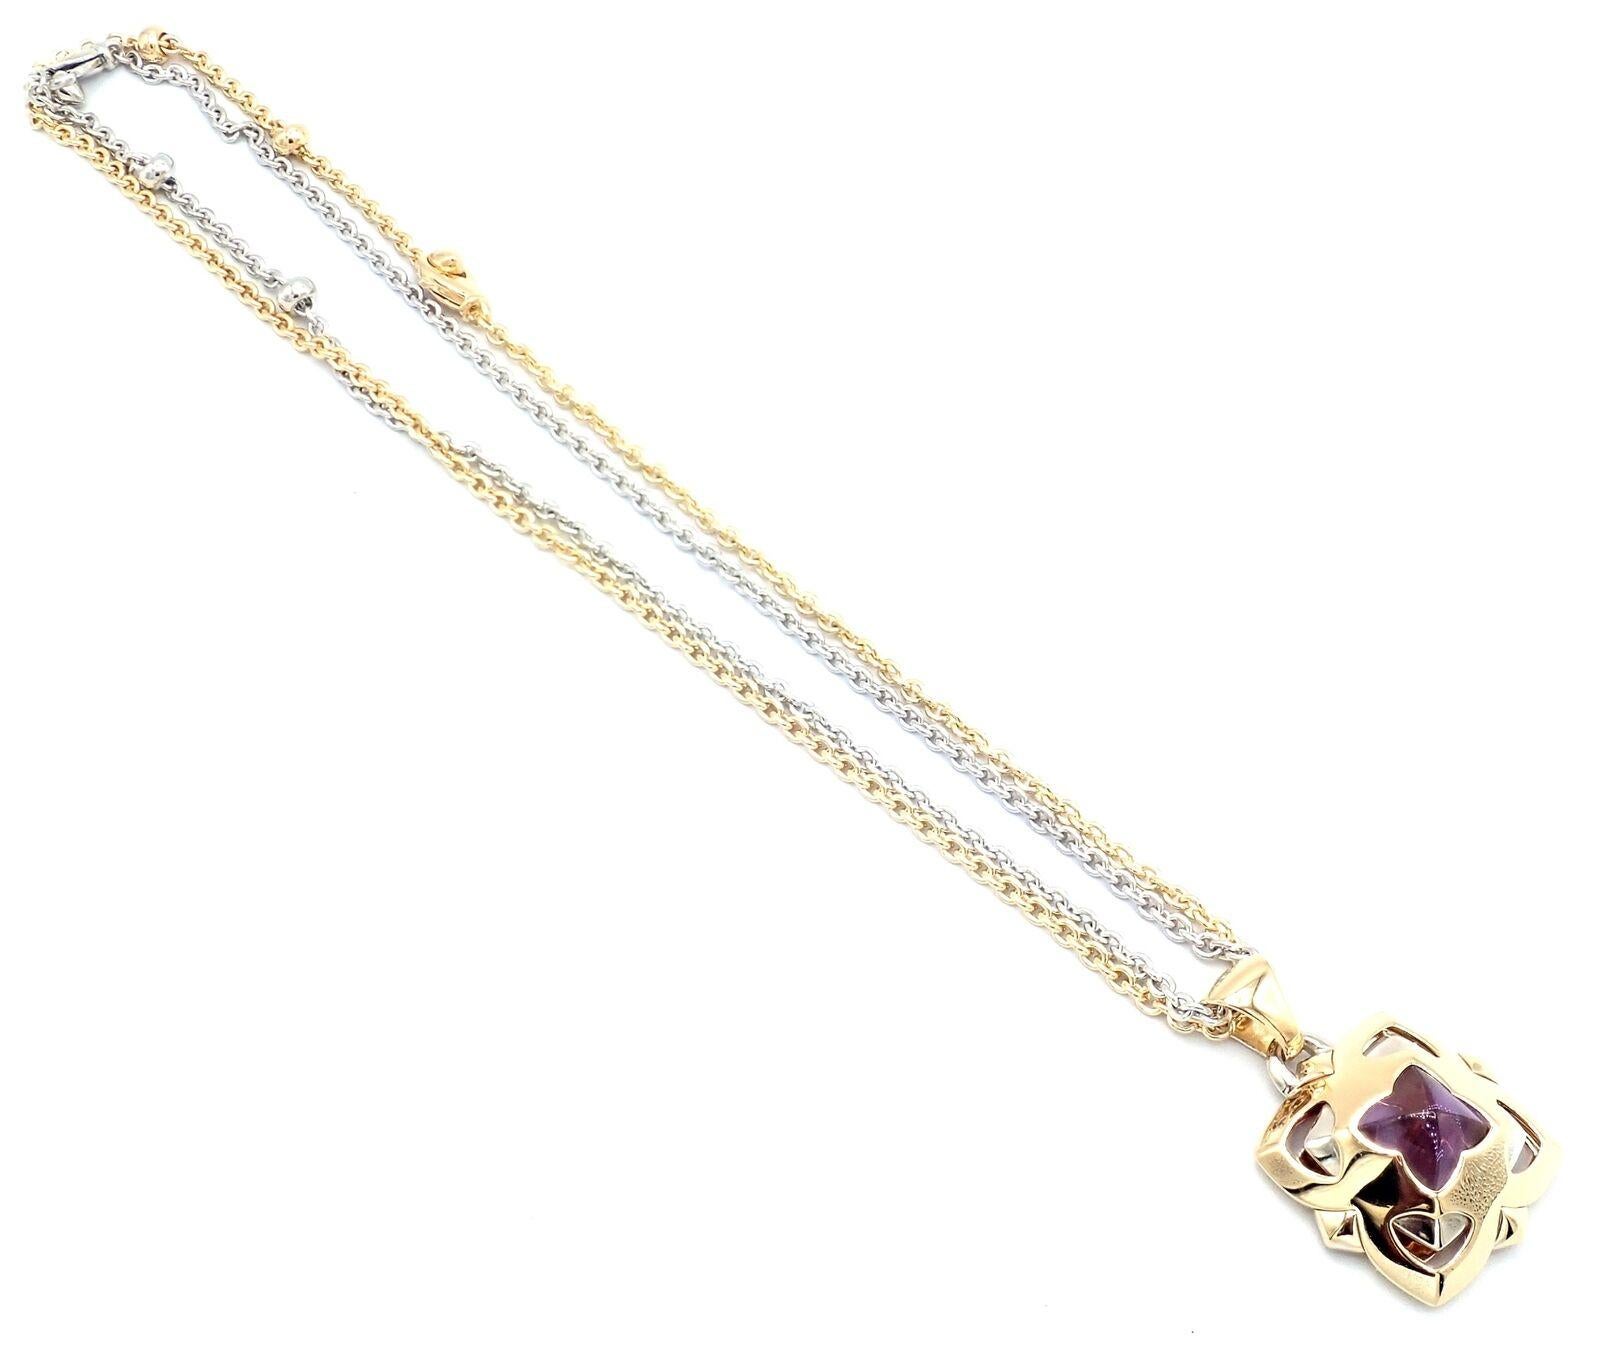 Bvlgari Bulgari Pyramid Amethyst Pendant Yellow & White Gold Chains Necklace In Excellent Condition For Sale In Holland, PA